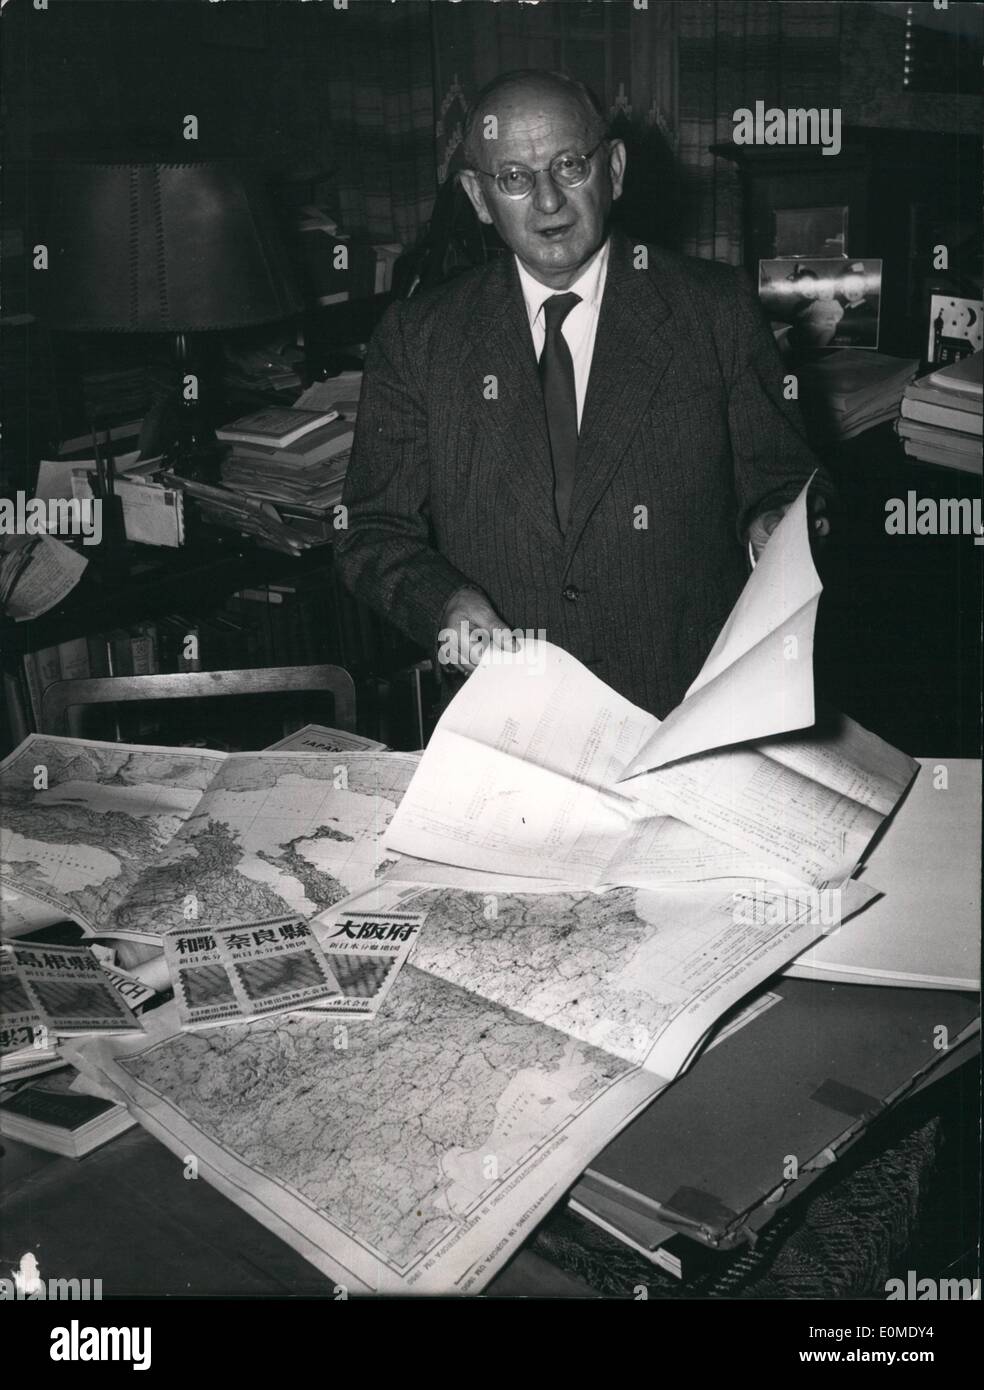 Jan. 01, 1955 - A new atlas: The Munich University professor Dr. Friedrich Burgdofer made a new atlas which shows the distribution of all the people over all the world very detailed. The Atlas is written in German and English language. Photo shows Dr. Burgdorfer during his work. Stock Photo